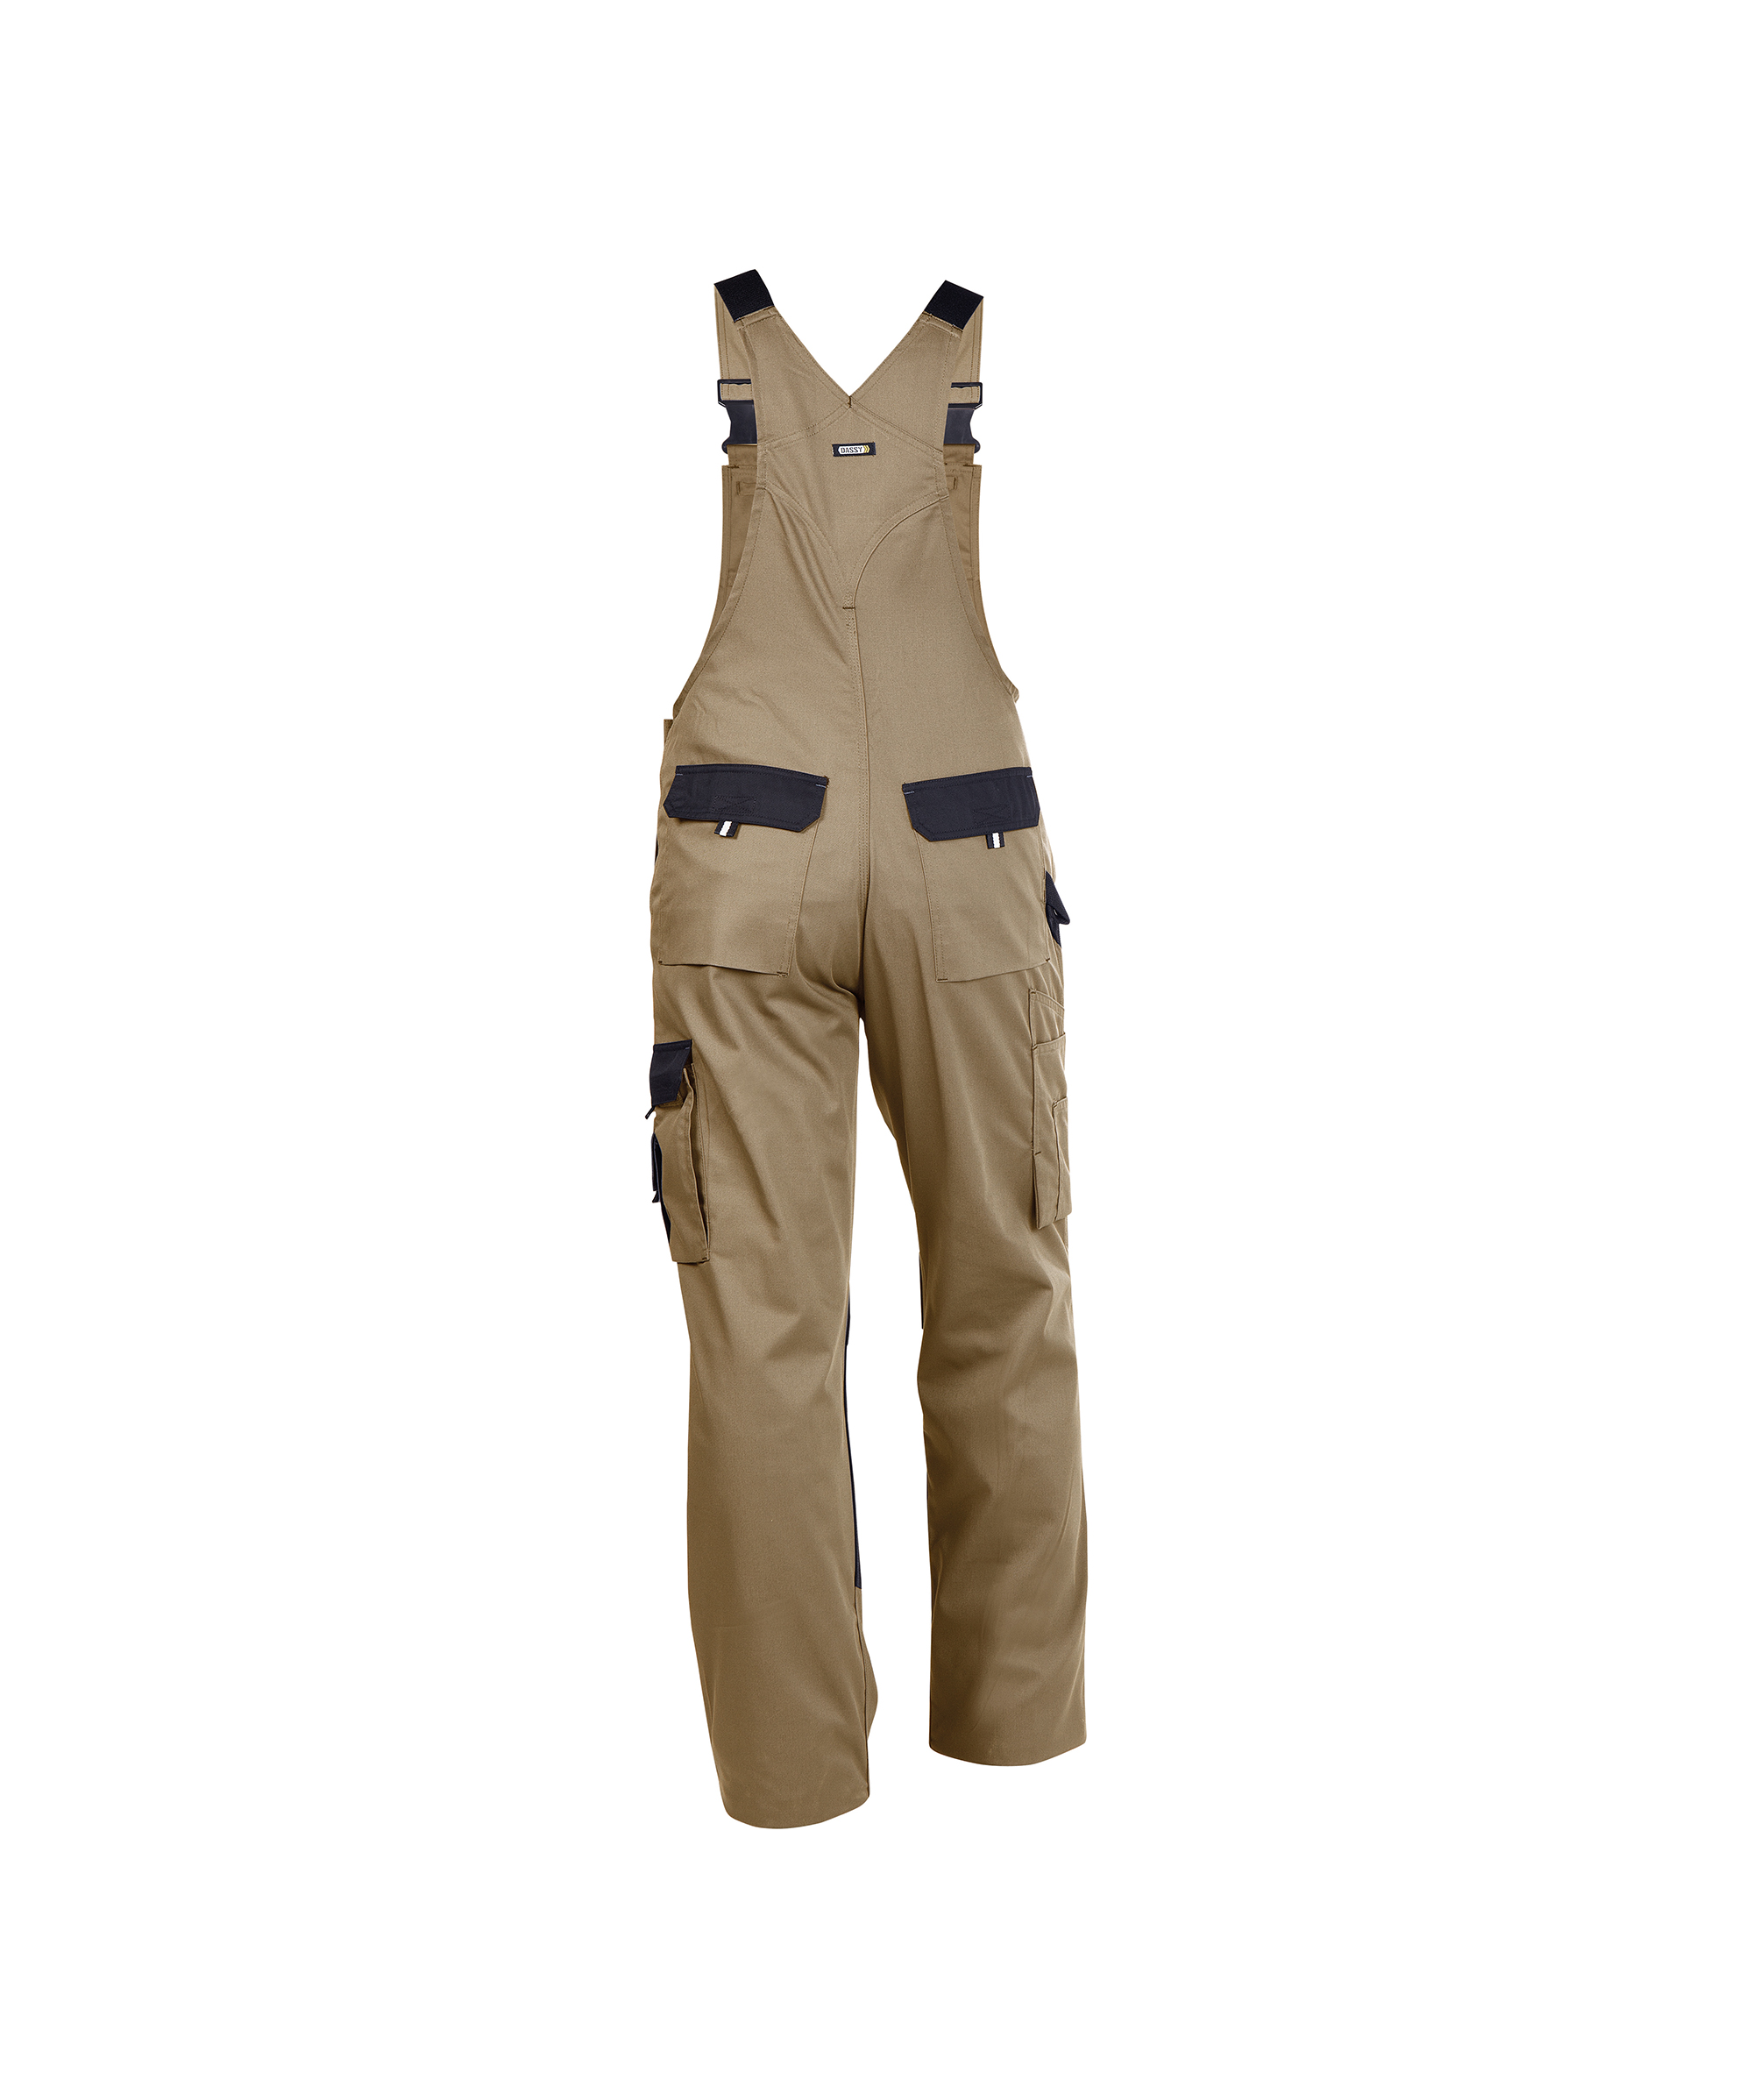 versailles_two-tone-brace-overall-with-knee-pockets_beige-black_back.jpg